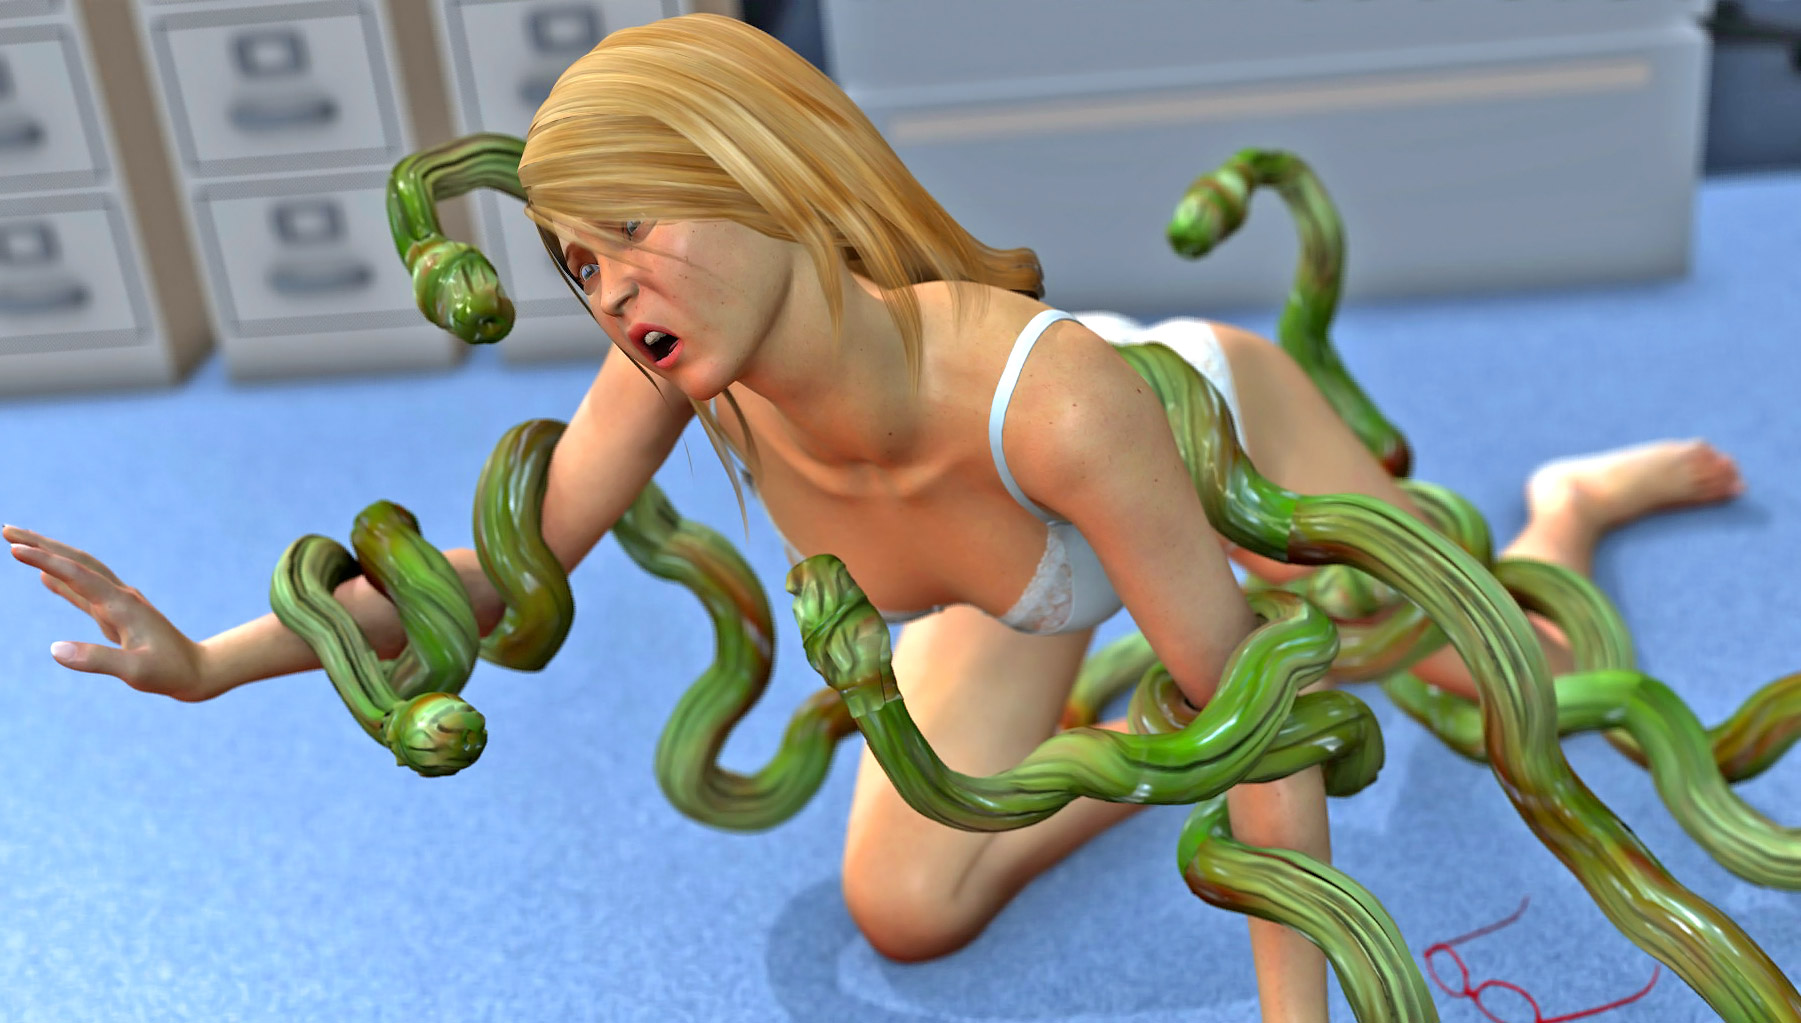 3d Monster Tentacle Porn - Sexy girl gets probed by a tentacle monster | KingdomOfEvil 3d